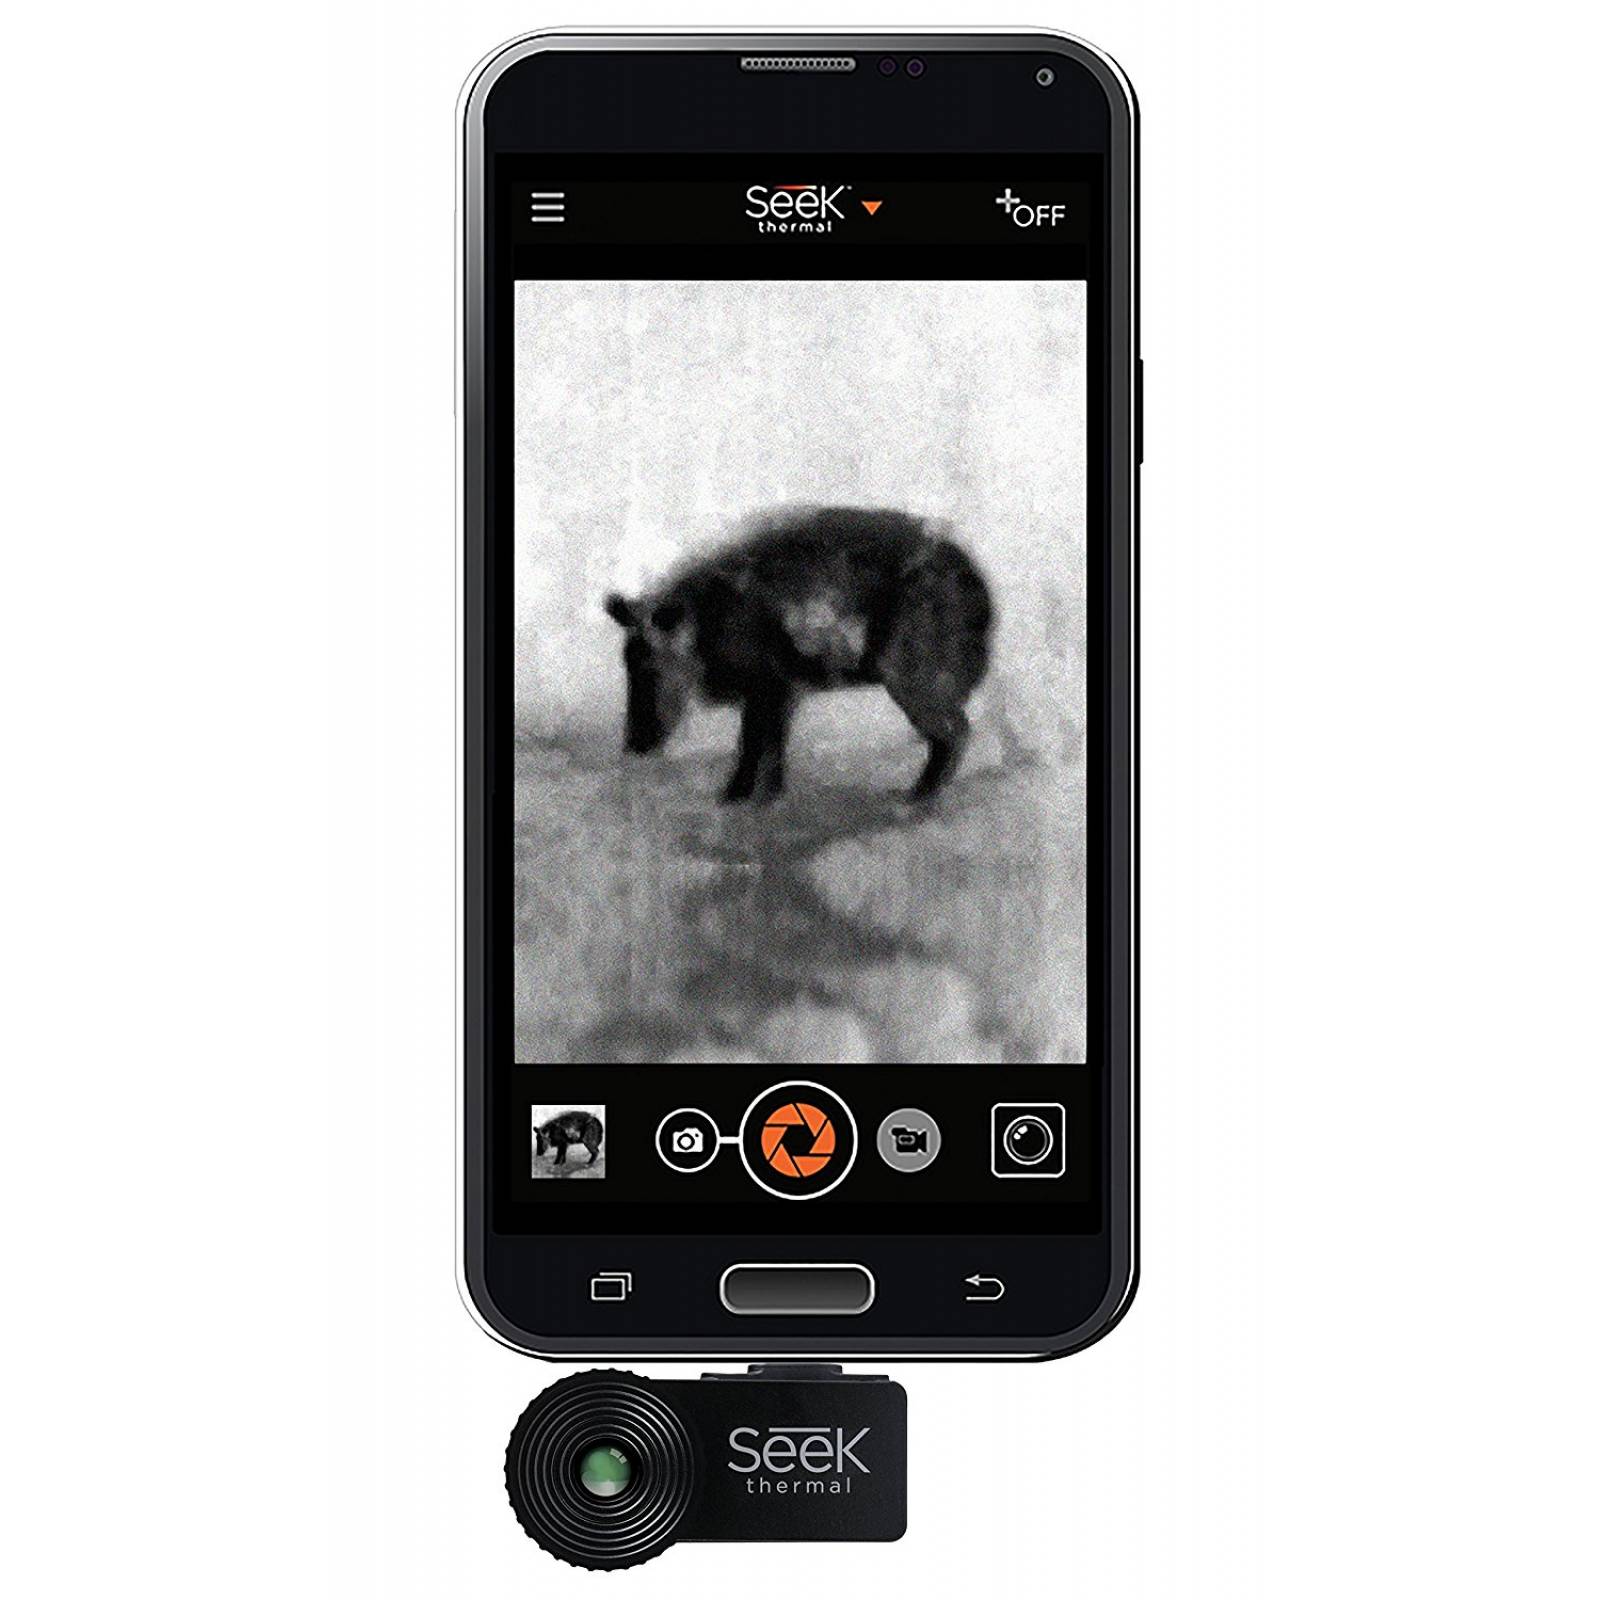 Buscar XR termal Imager Android